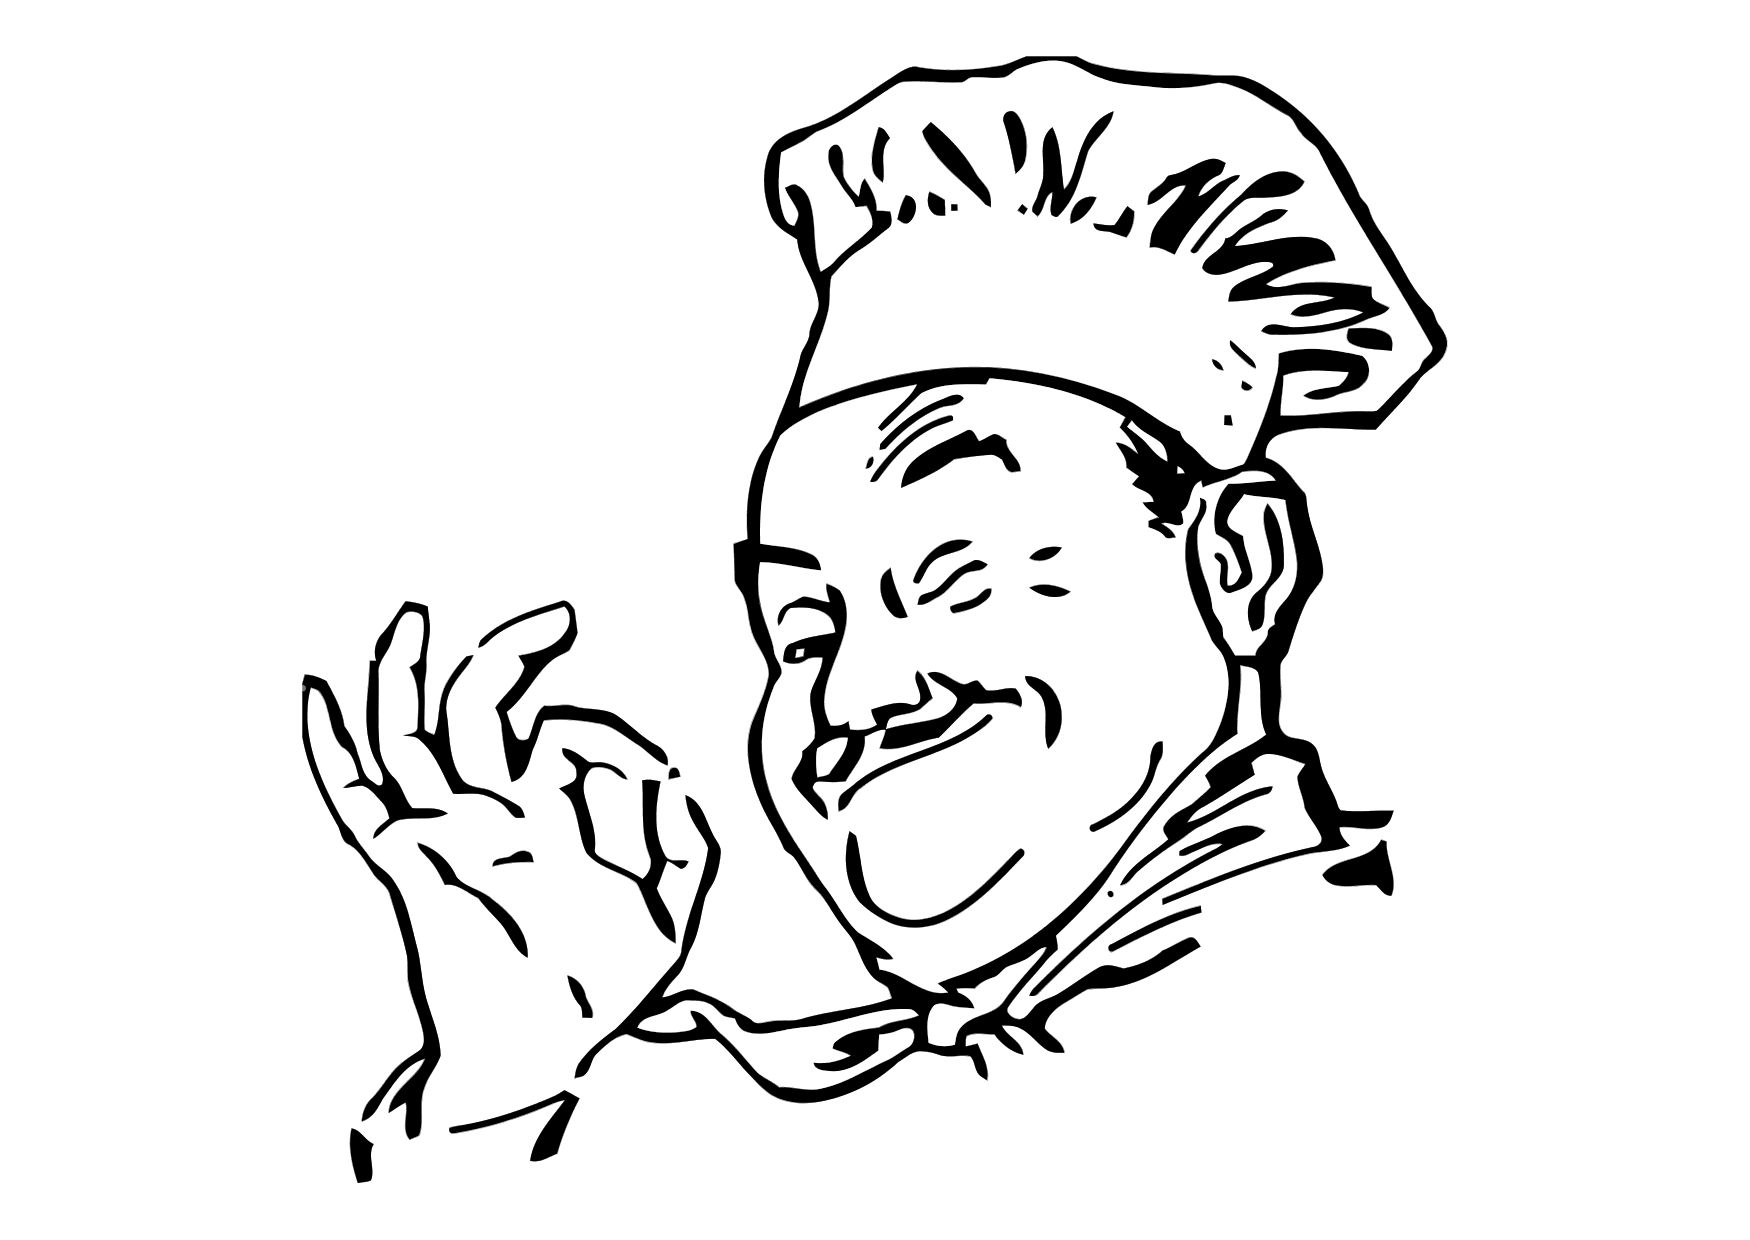 Chef coloring page